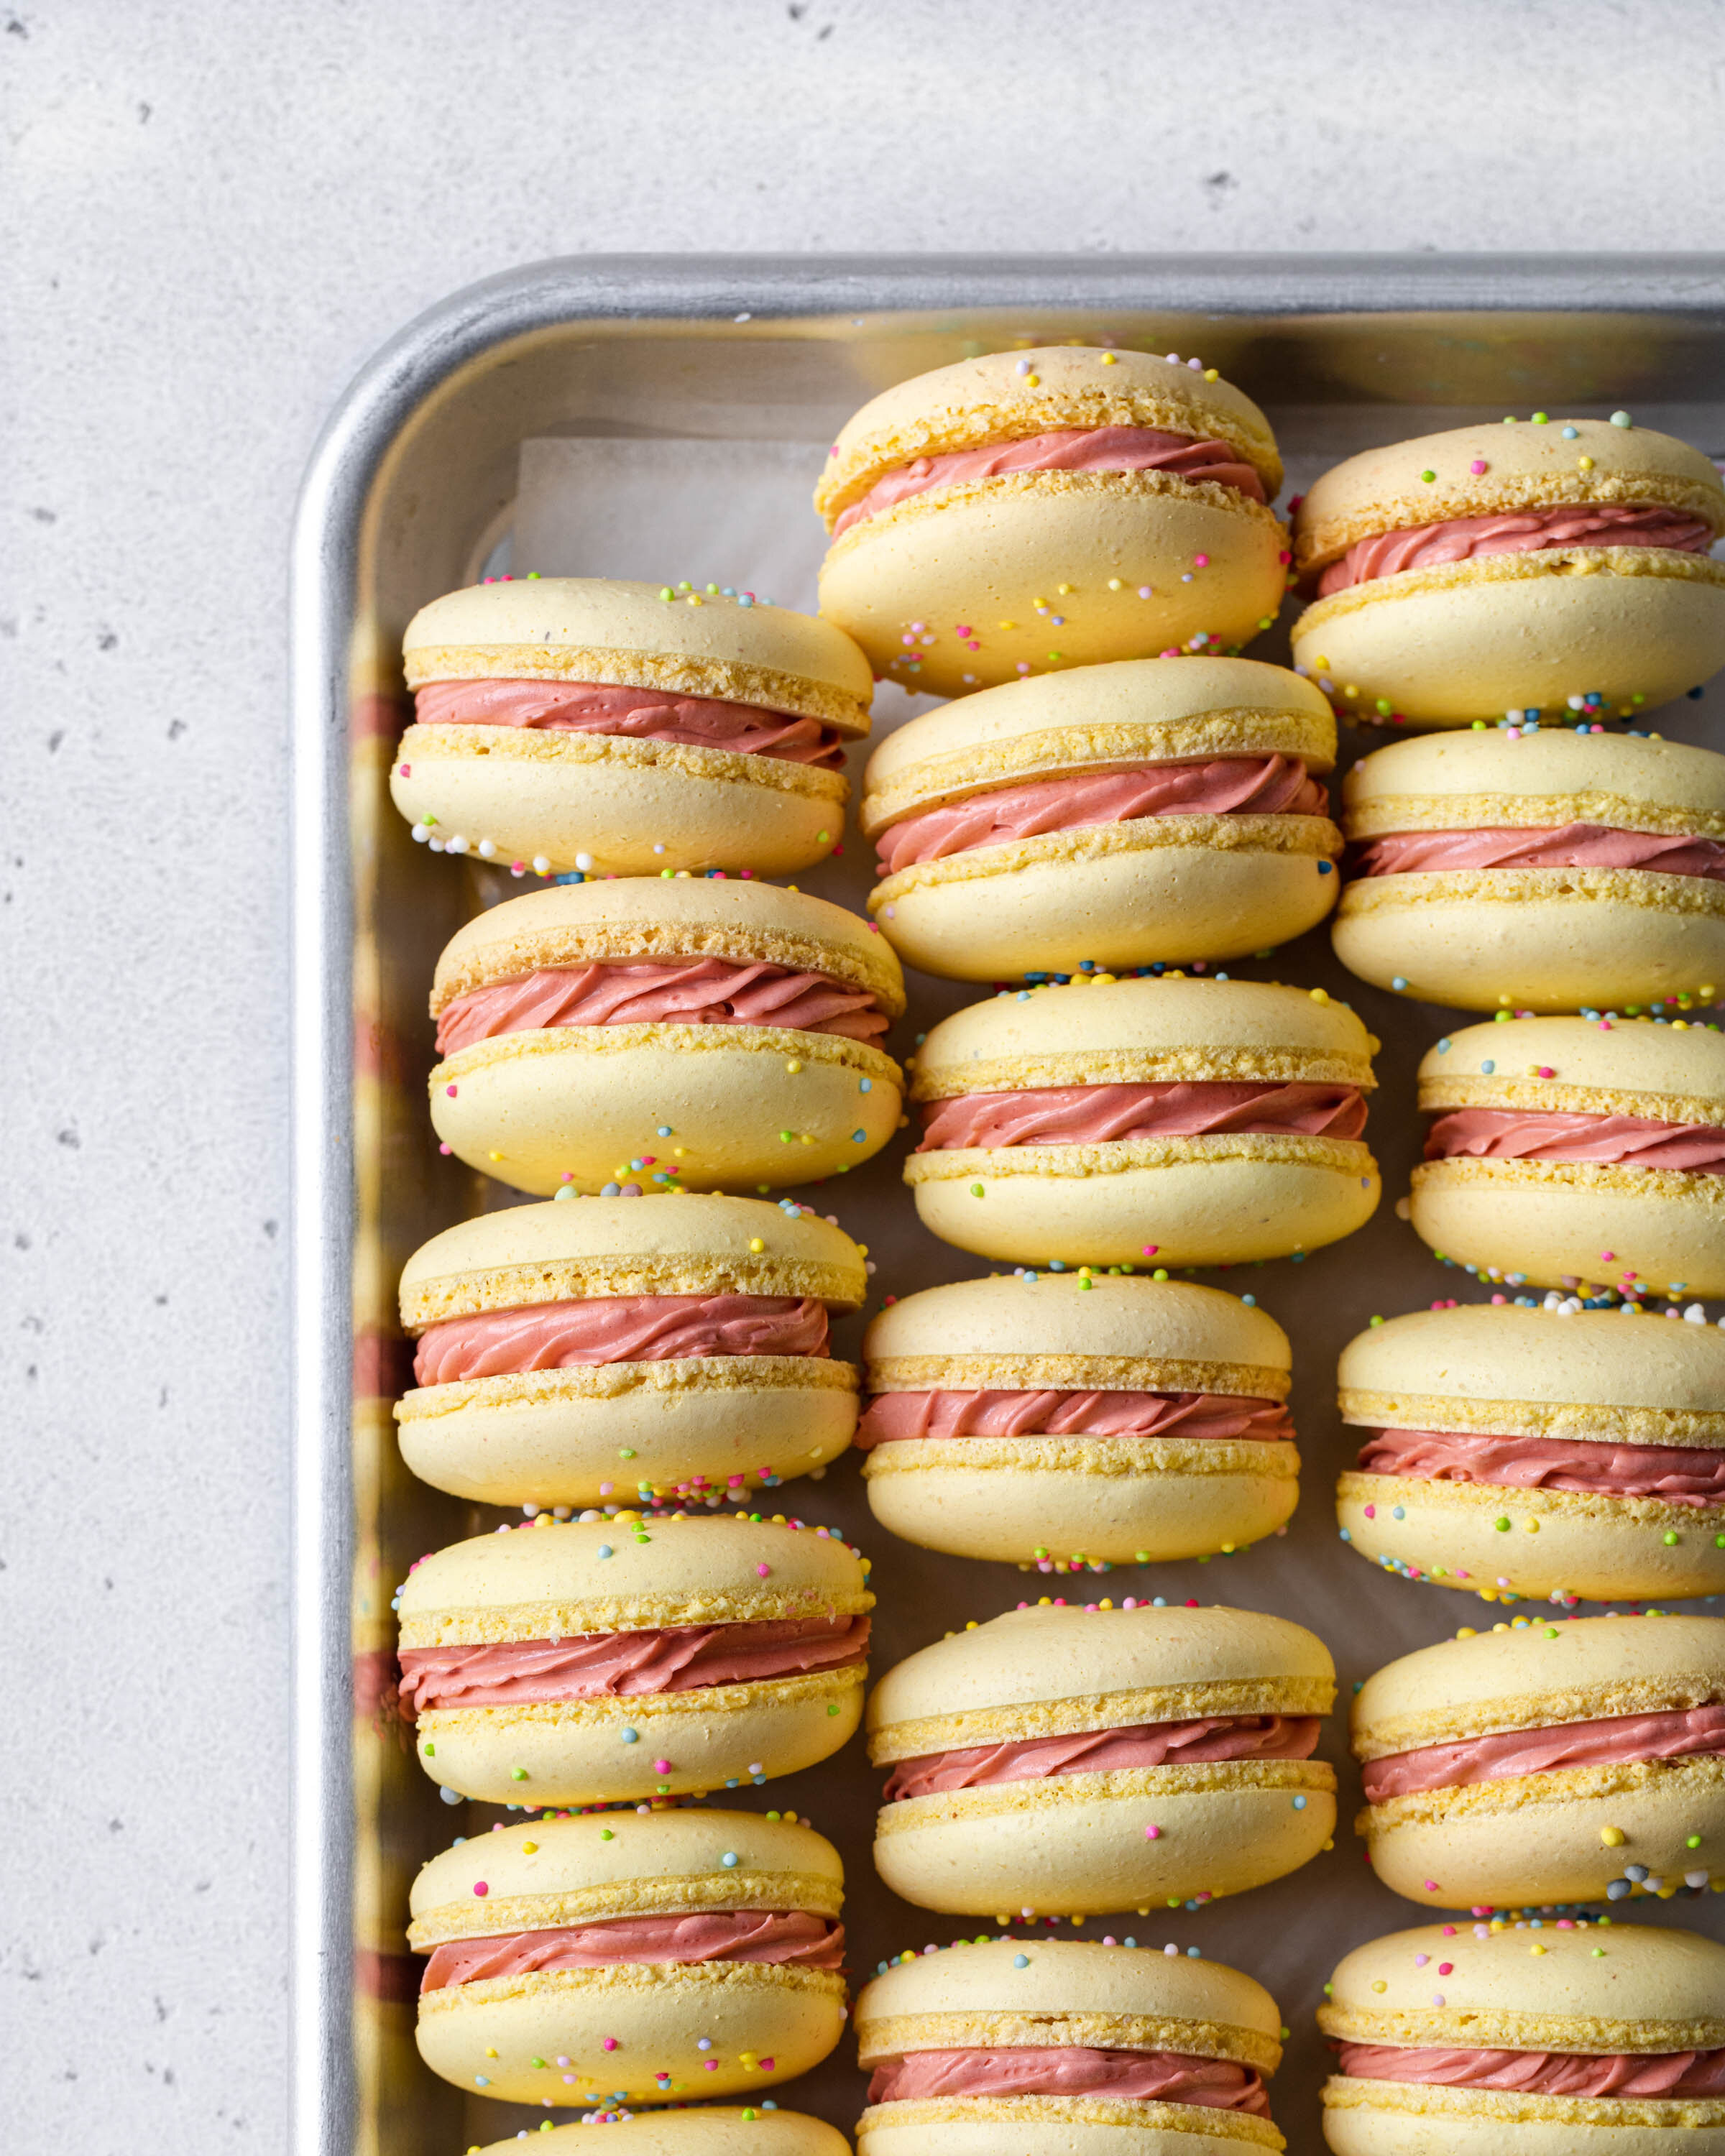 Perfect French macarons tips and how to make the best macarons every time.